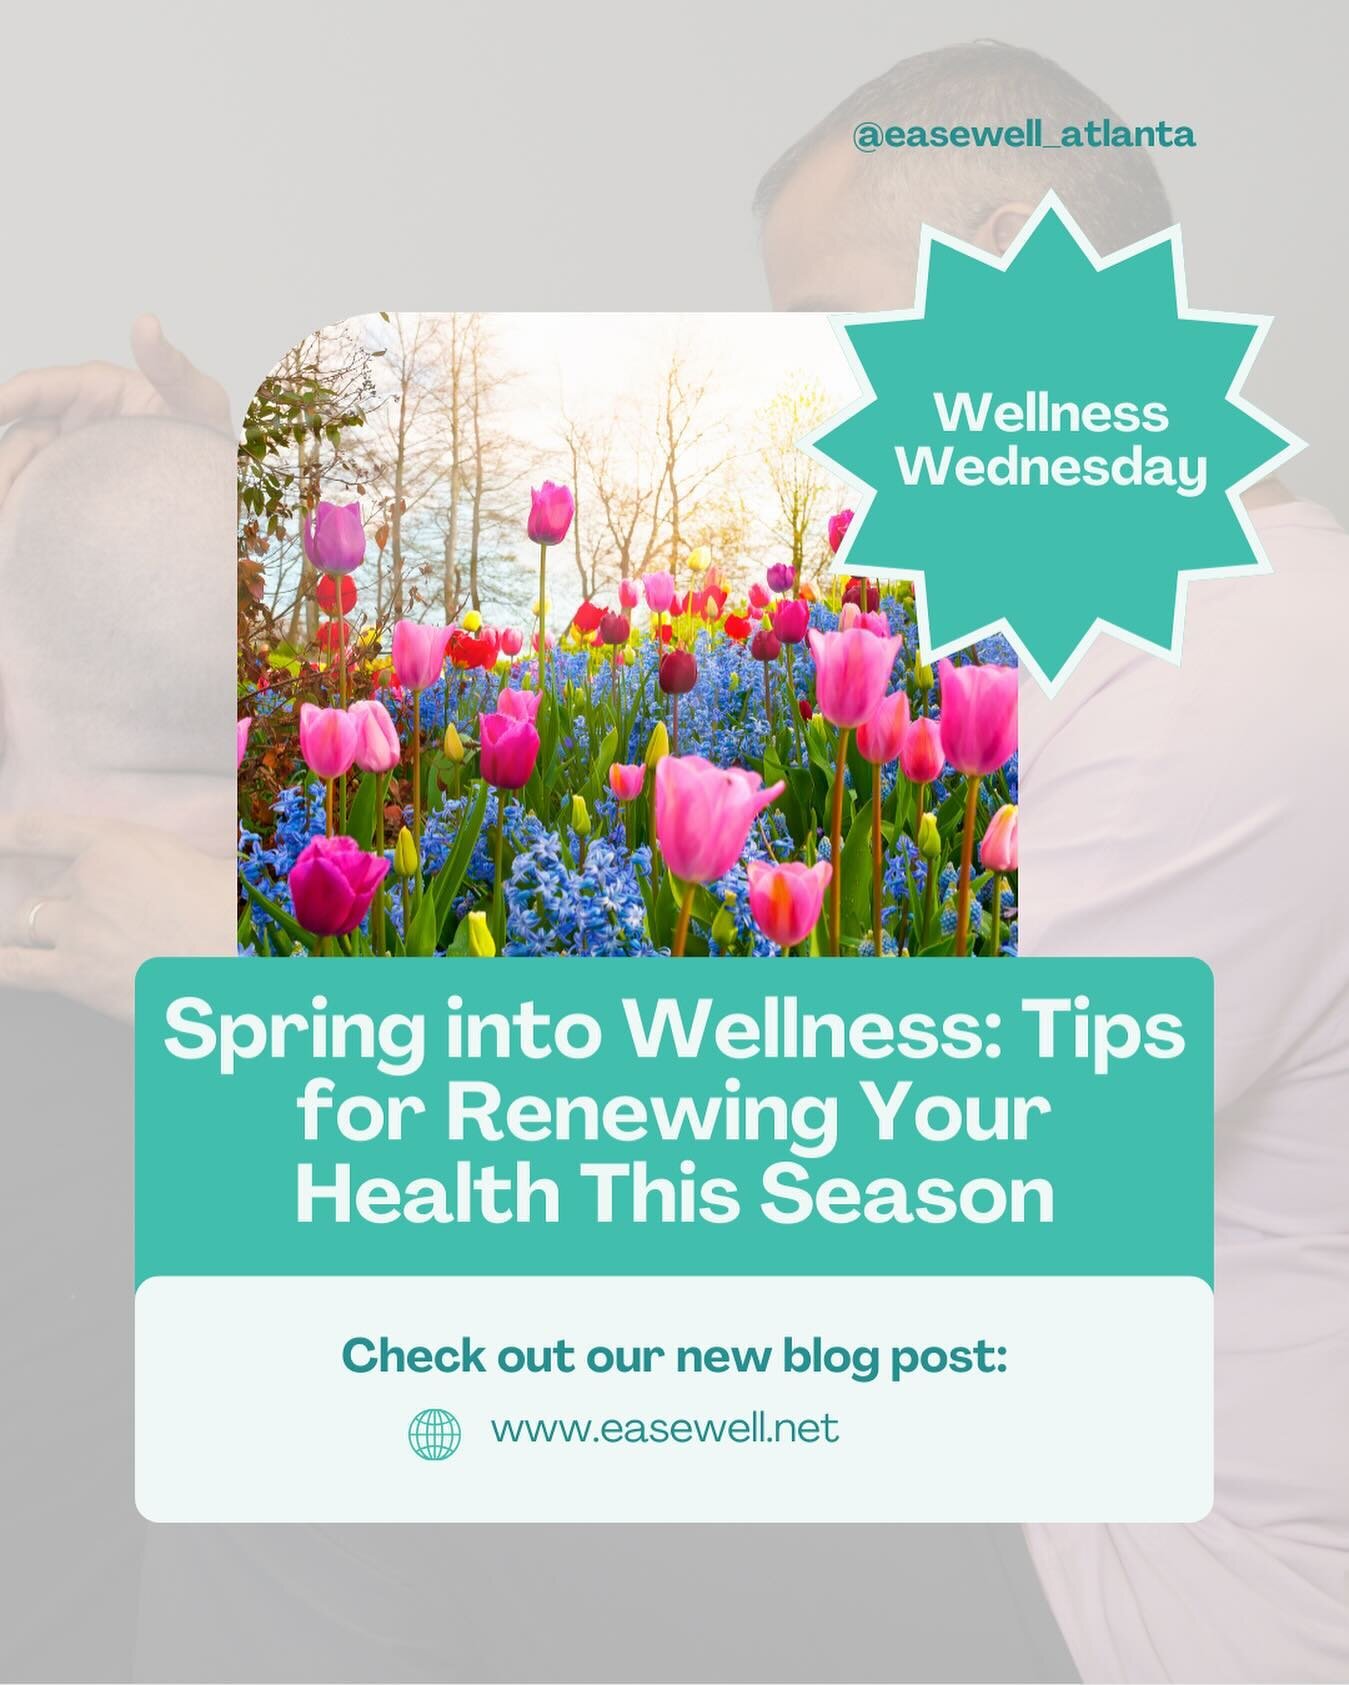 🌷✨ New Blog Alert: Spring into Wellness! 🌞 As the days grow longer and the world blooms around us, it&rsquo;s the perfect time to renew our health and embrace the season. Our latest blog post, &ldquo;Spring into Wellness: Tips for Renewing Your Hea